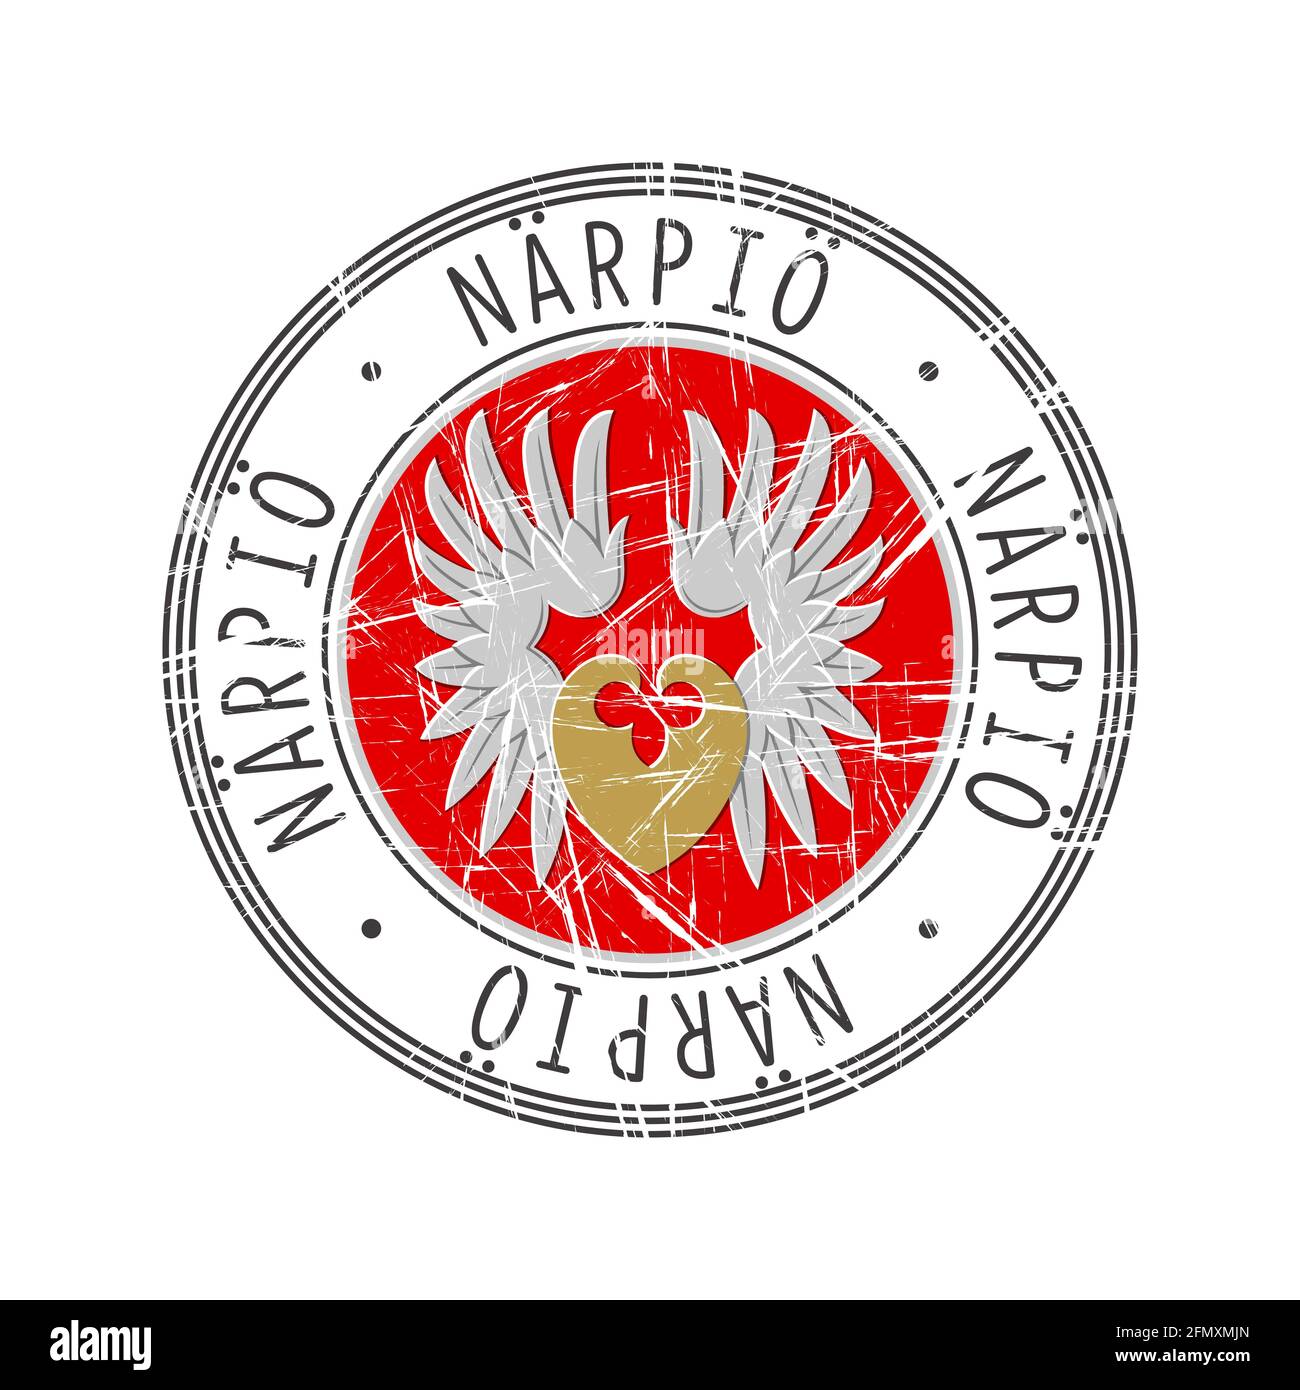 Narpio city, Finland. Grunge postal rubber stamp over white background Stock Vector